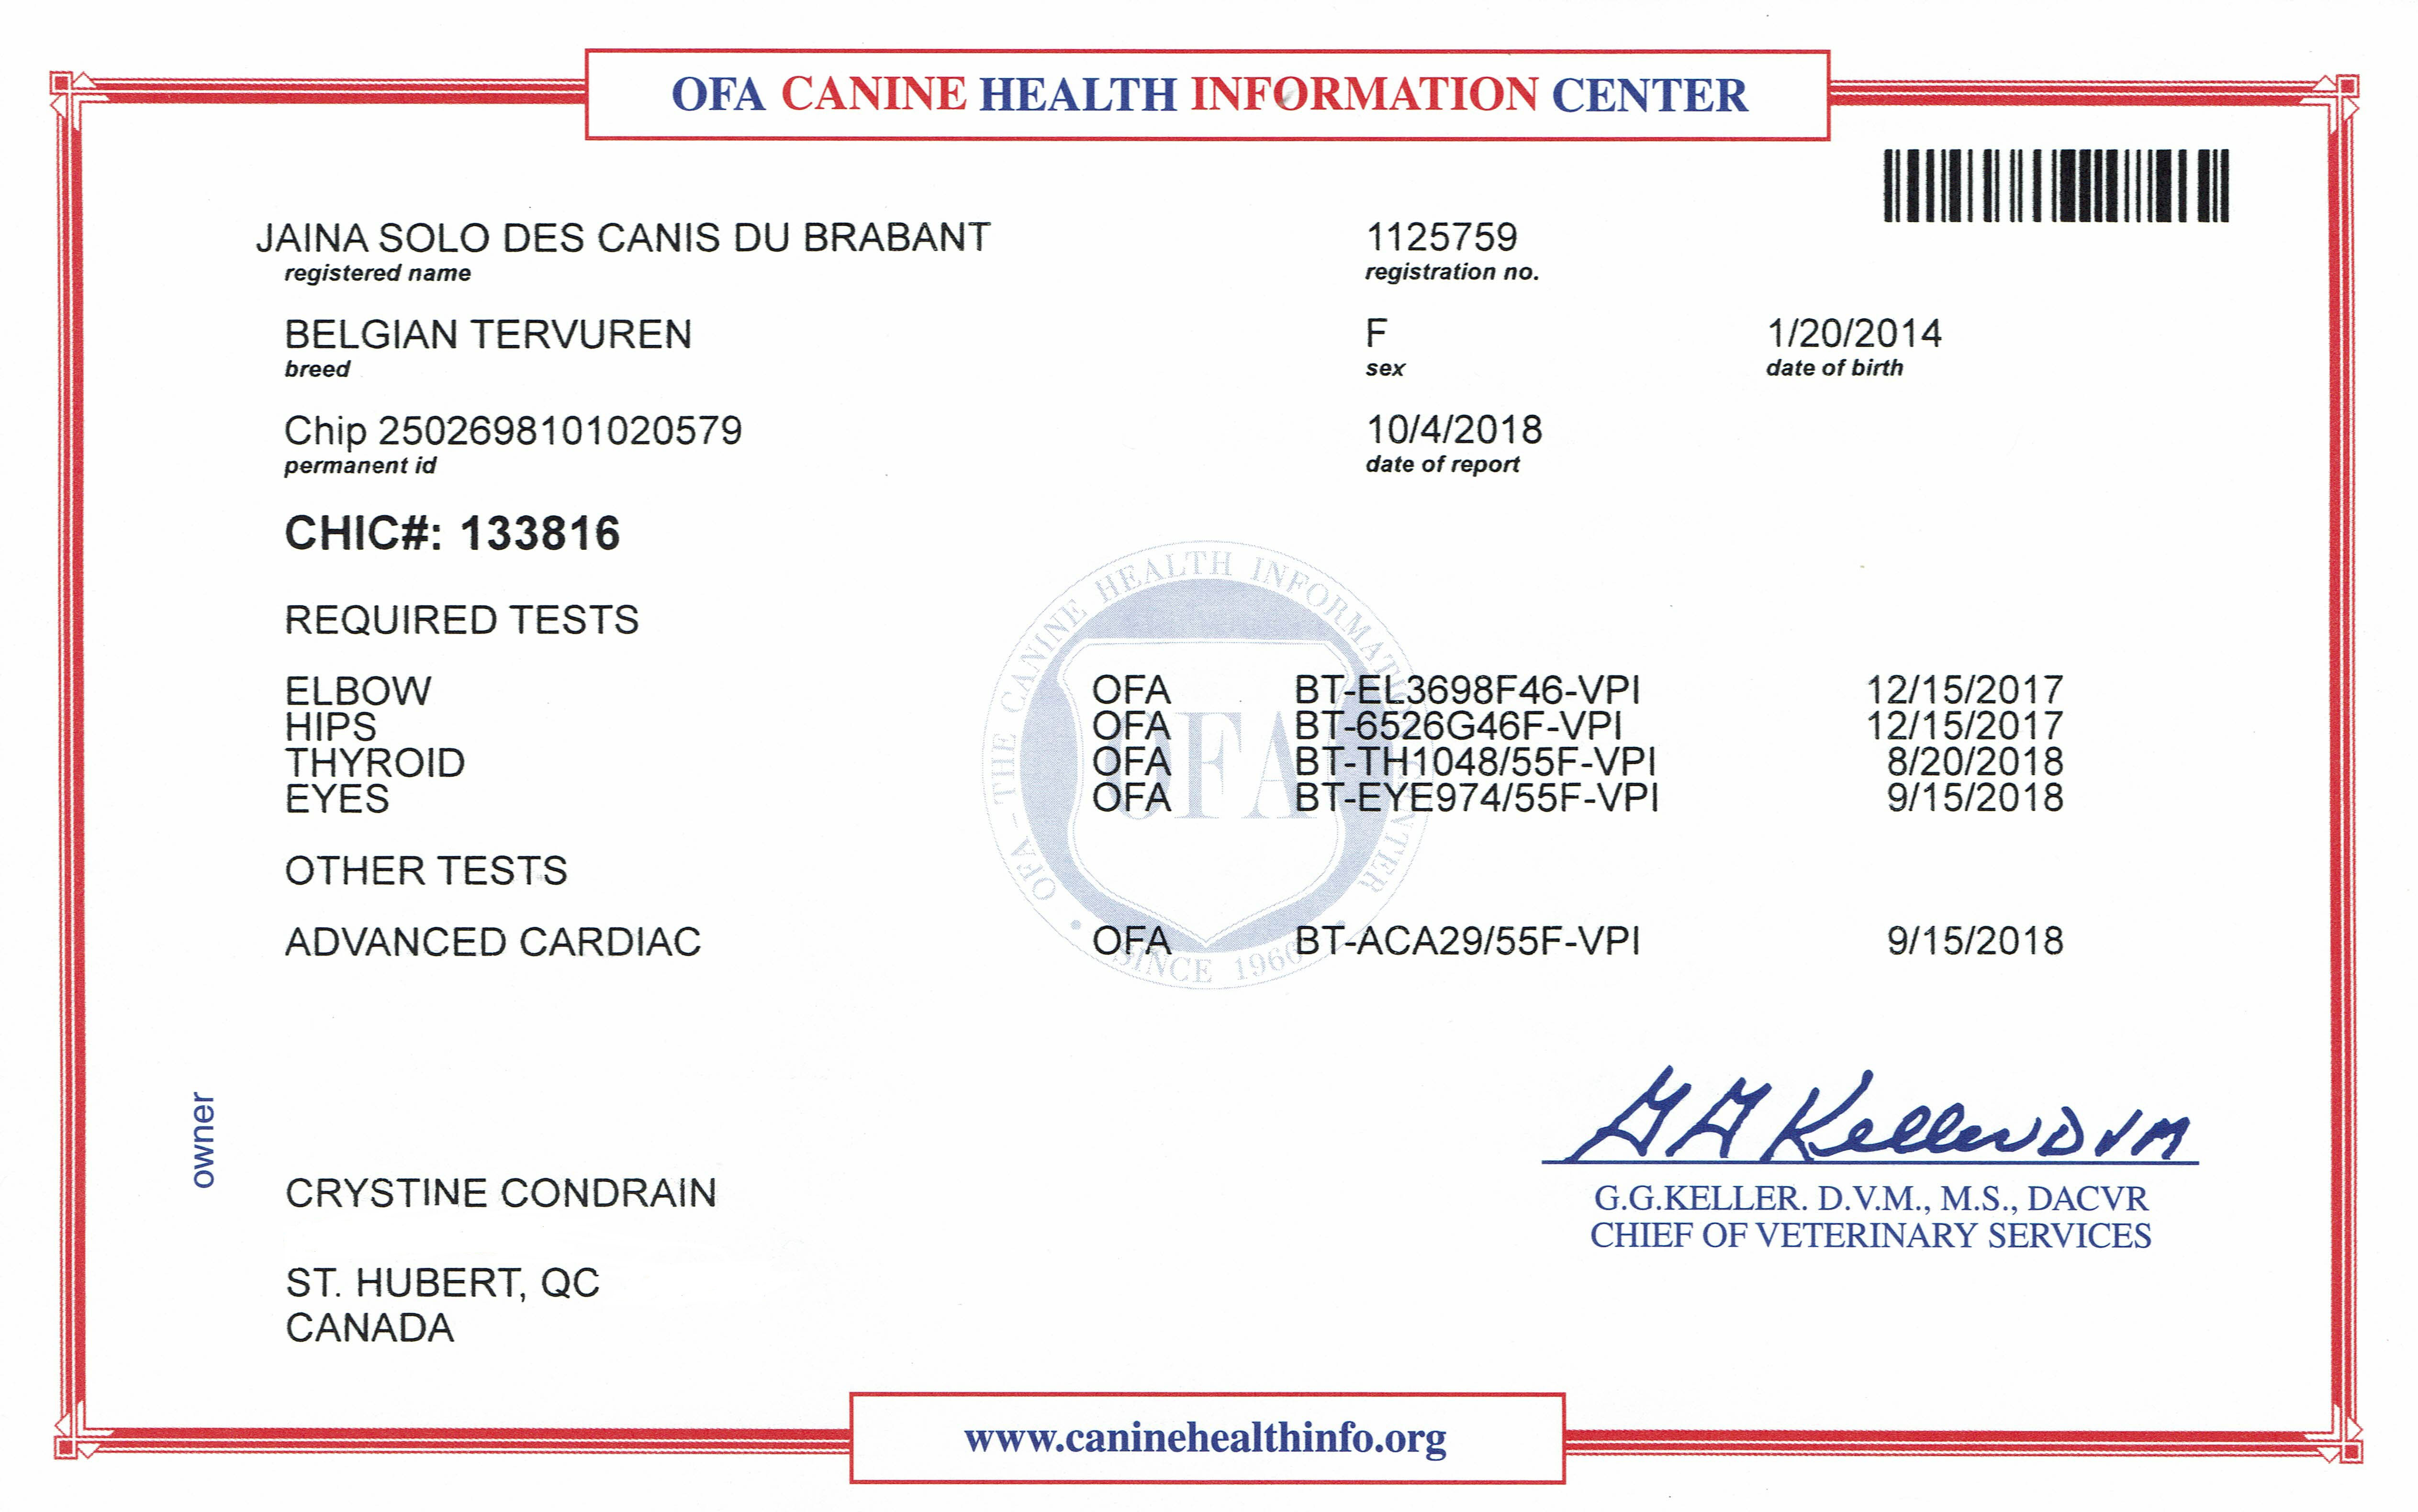 CHIC Certificate (Canine Health Information Center) # 133816.